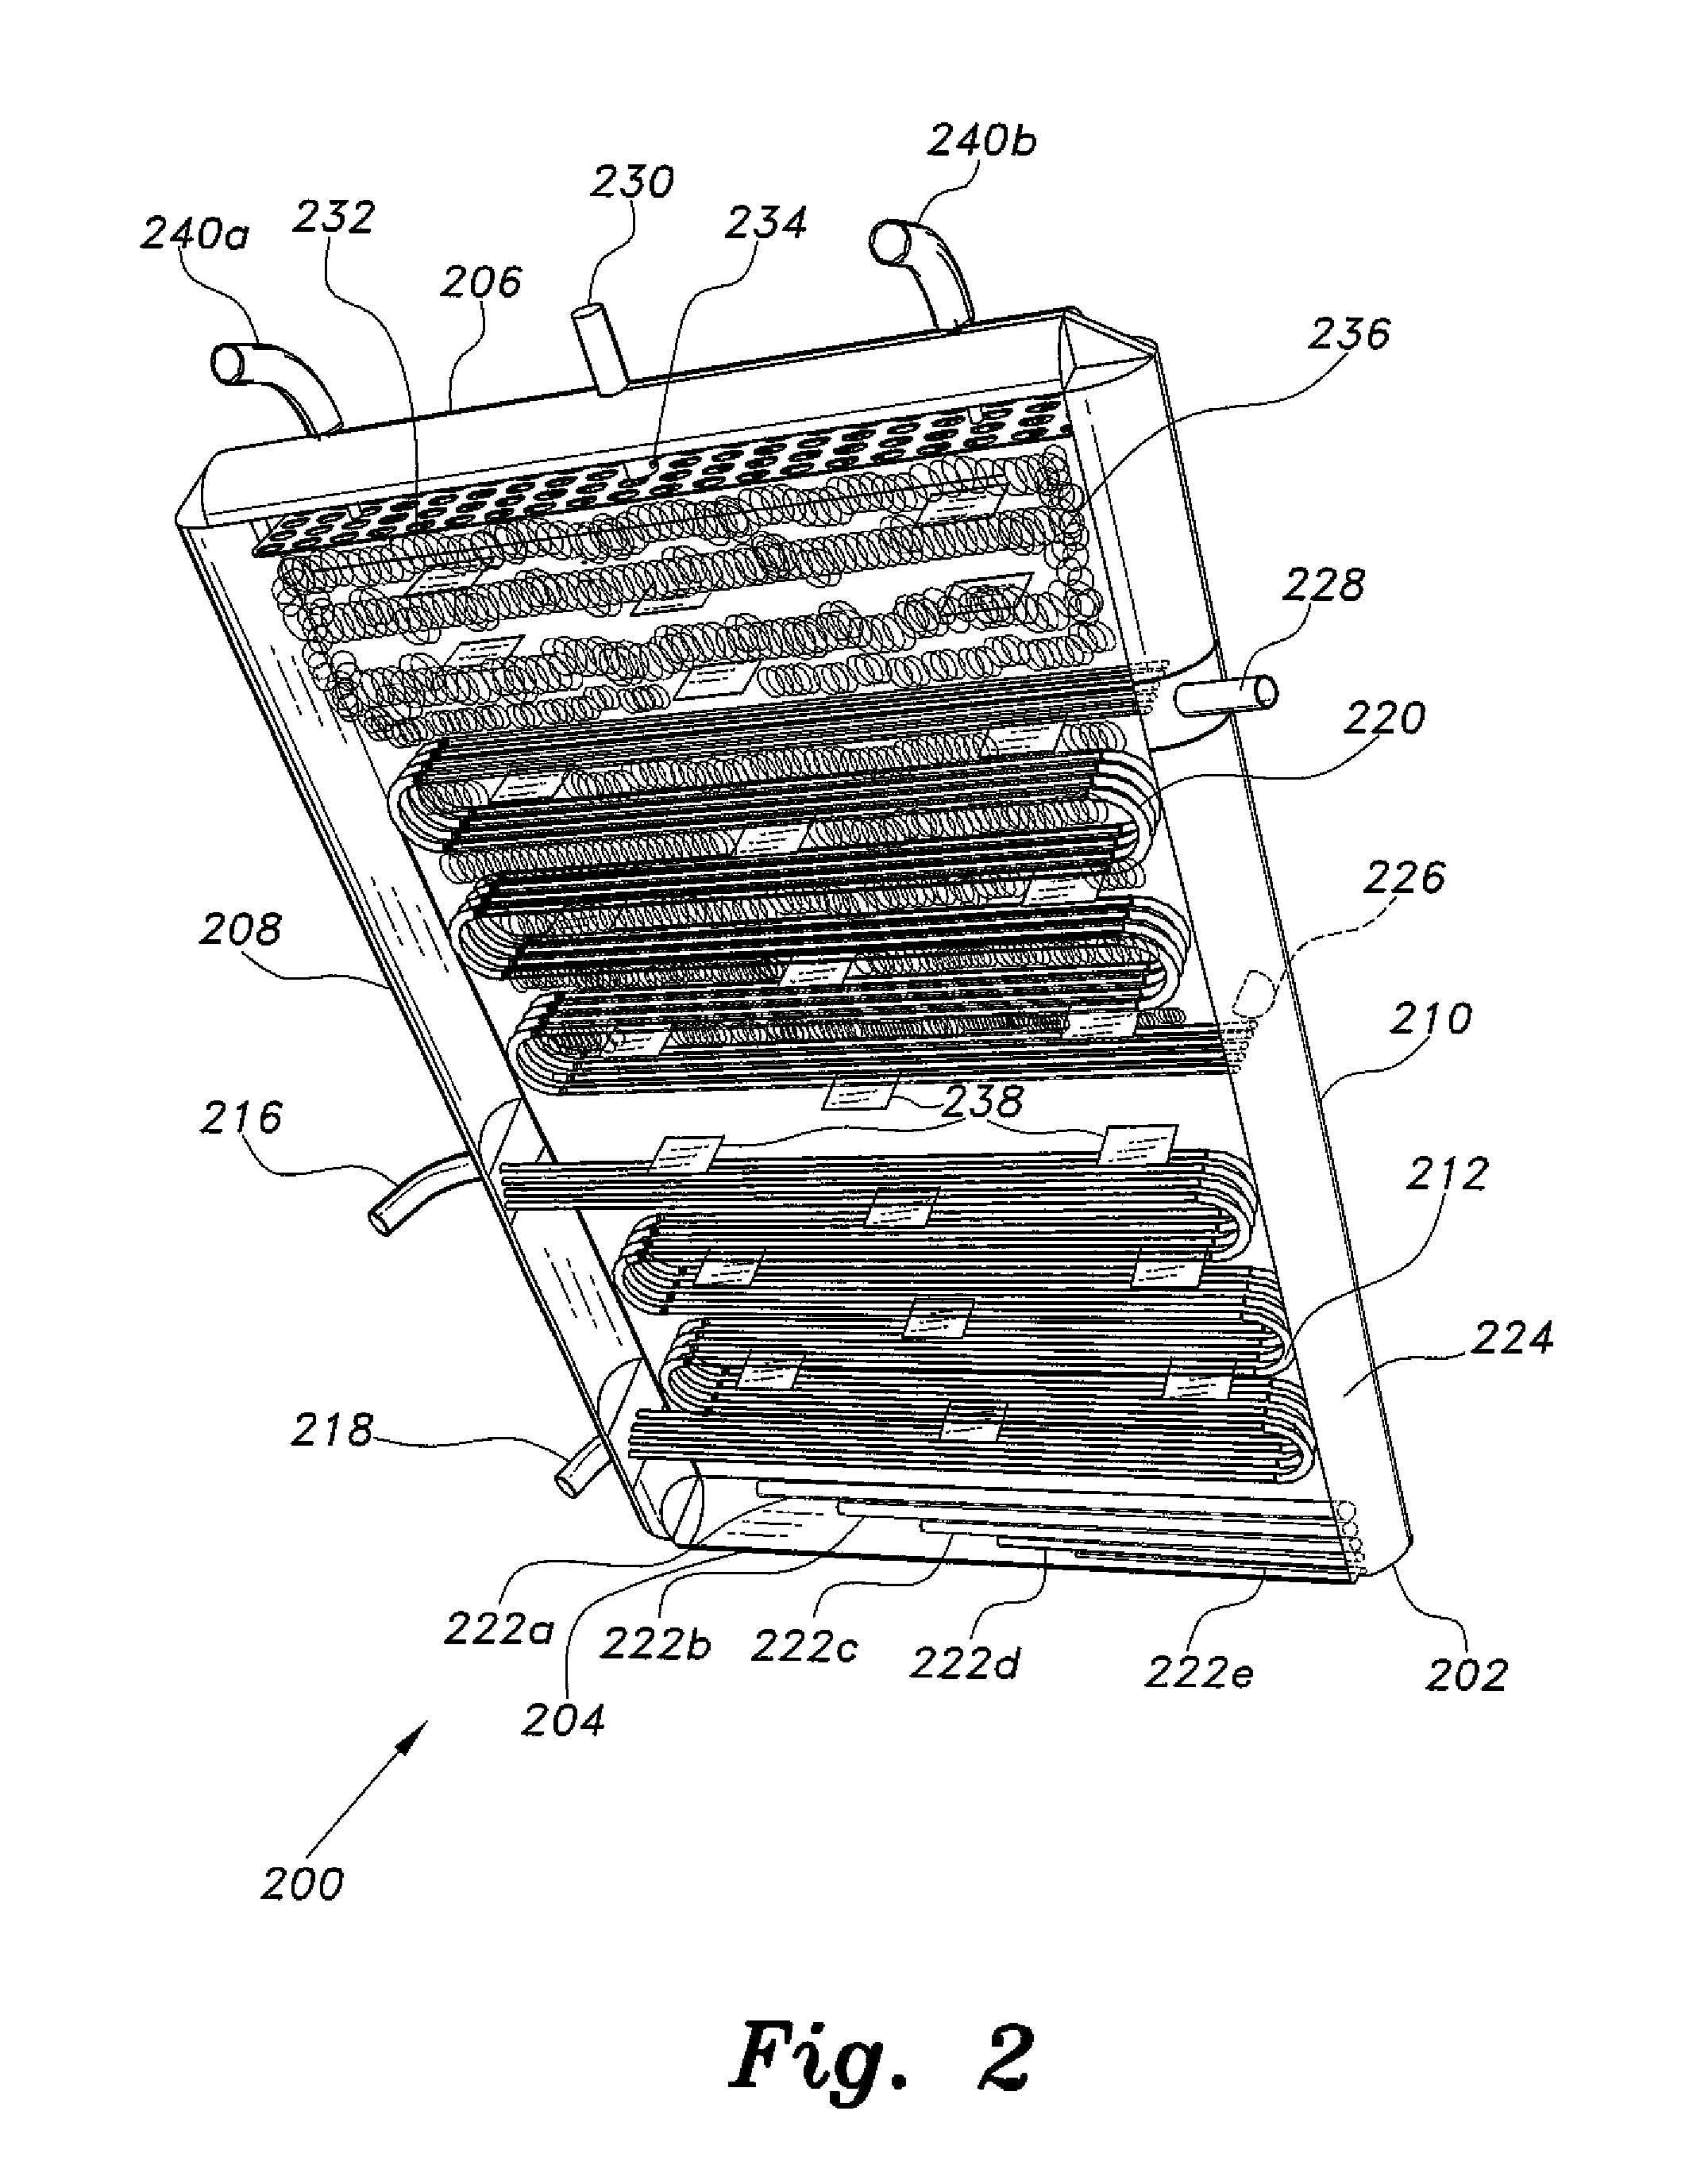 Absorption cooling system